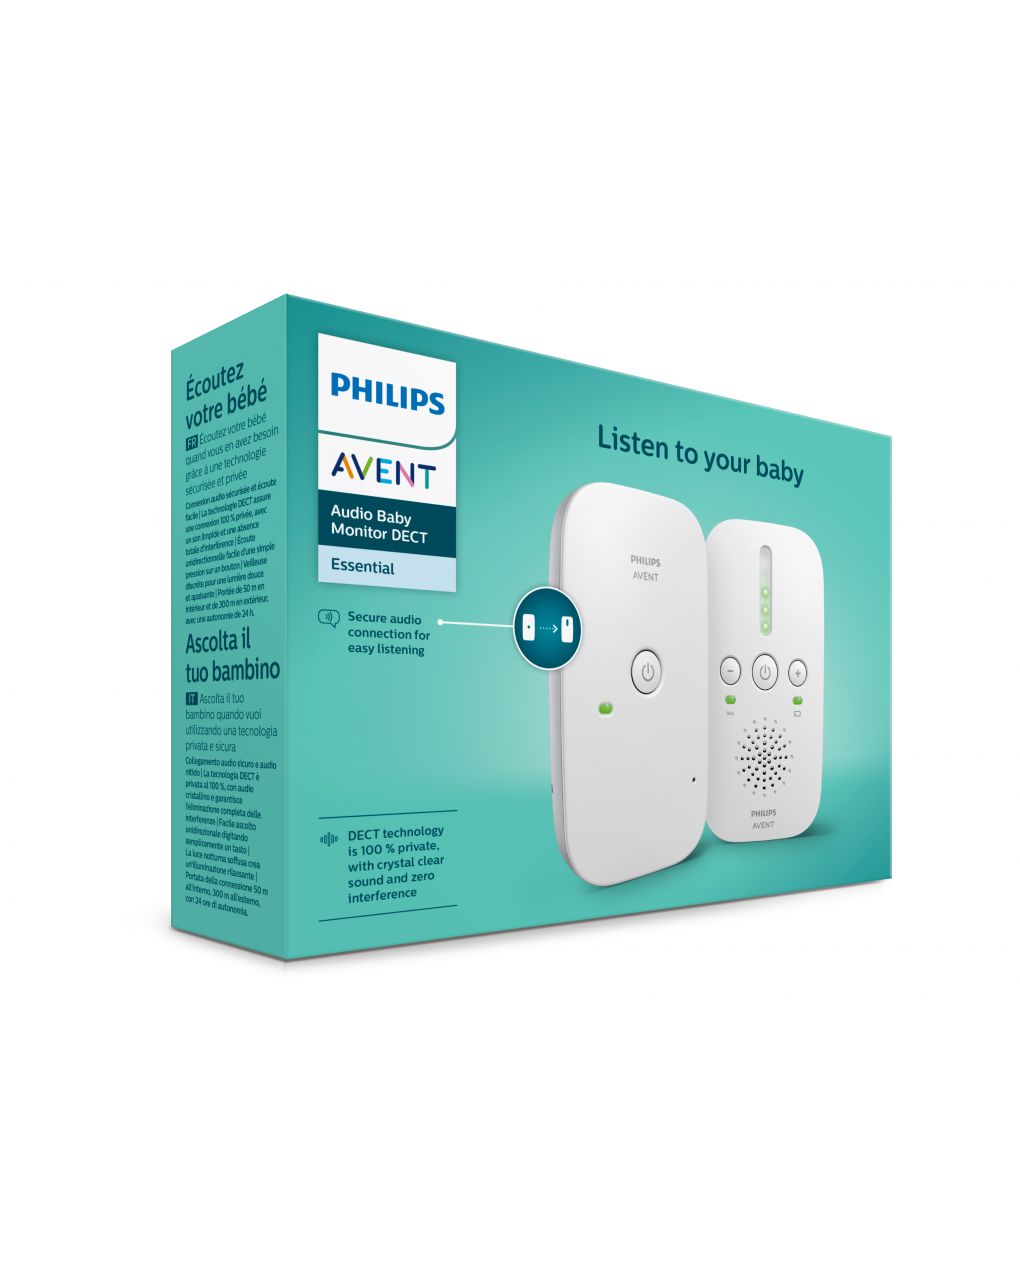 Avent - baby monitor dect entry - Philips Avent